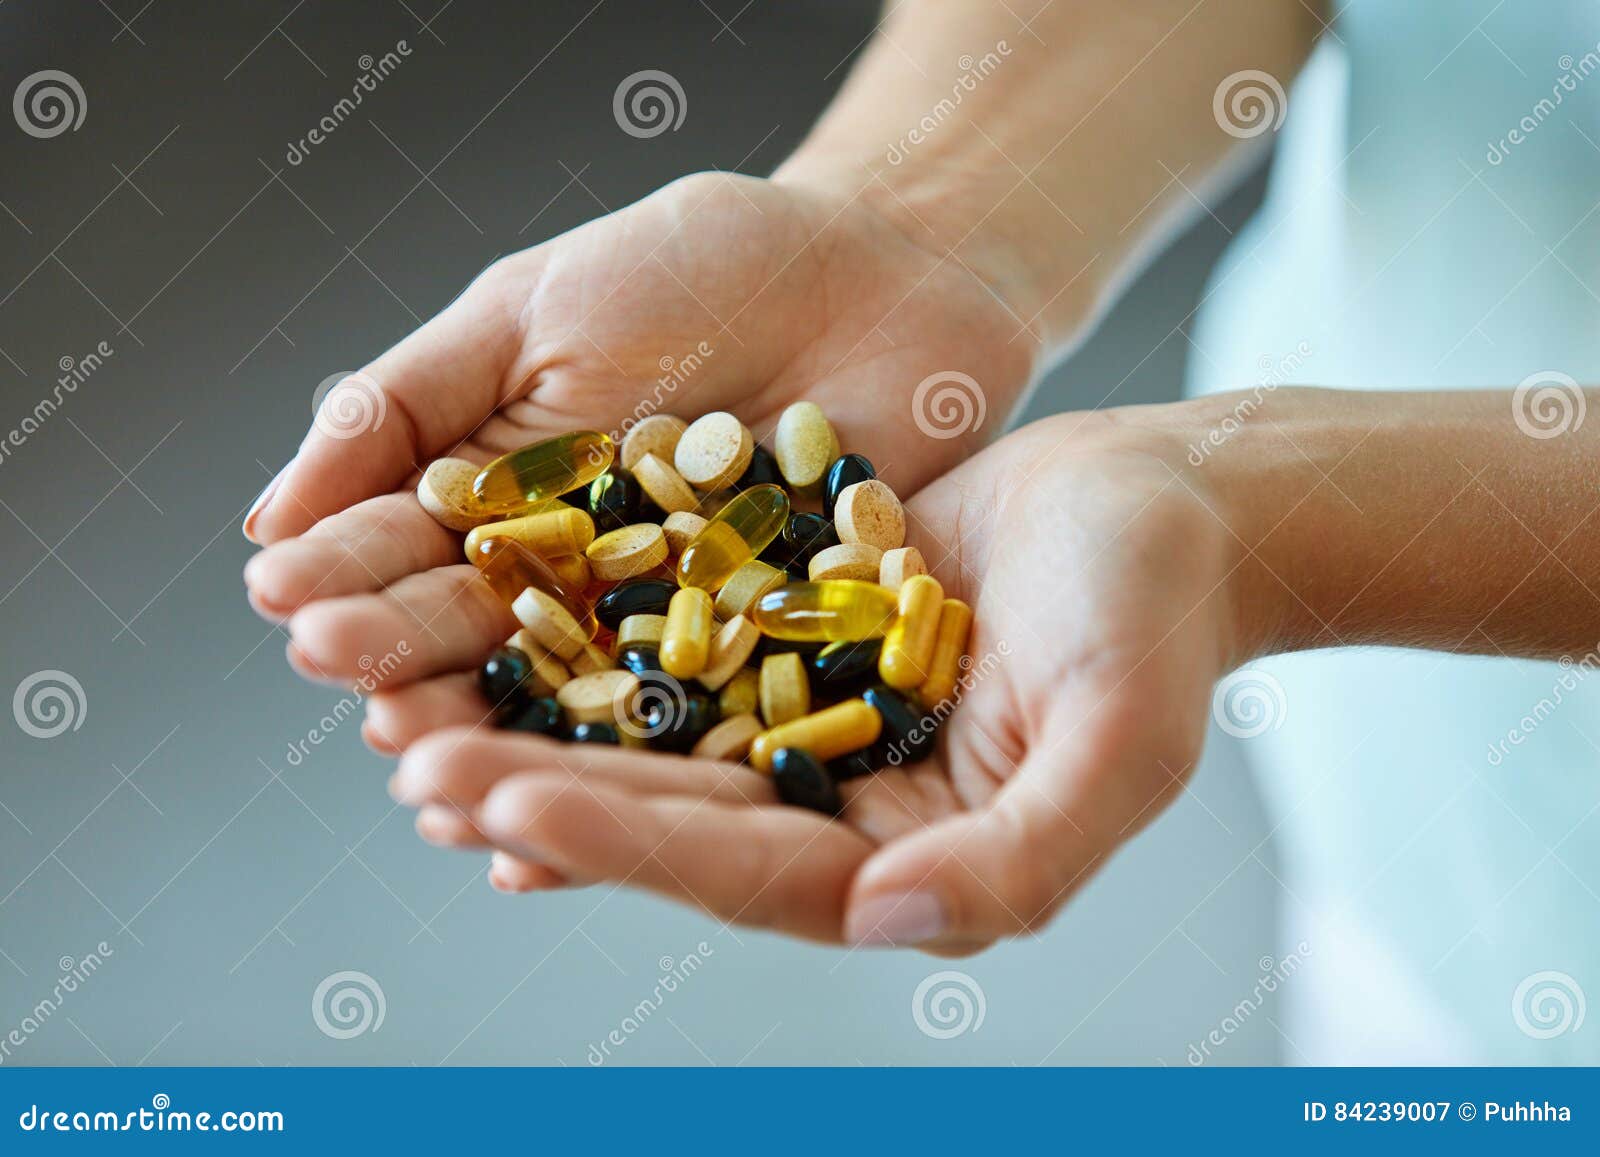 vitamins and supplements. woman hands full of medication pills